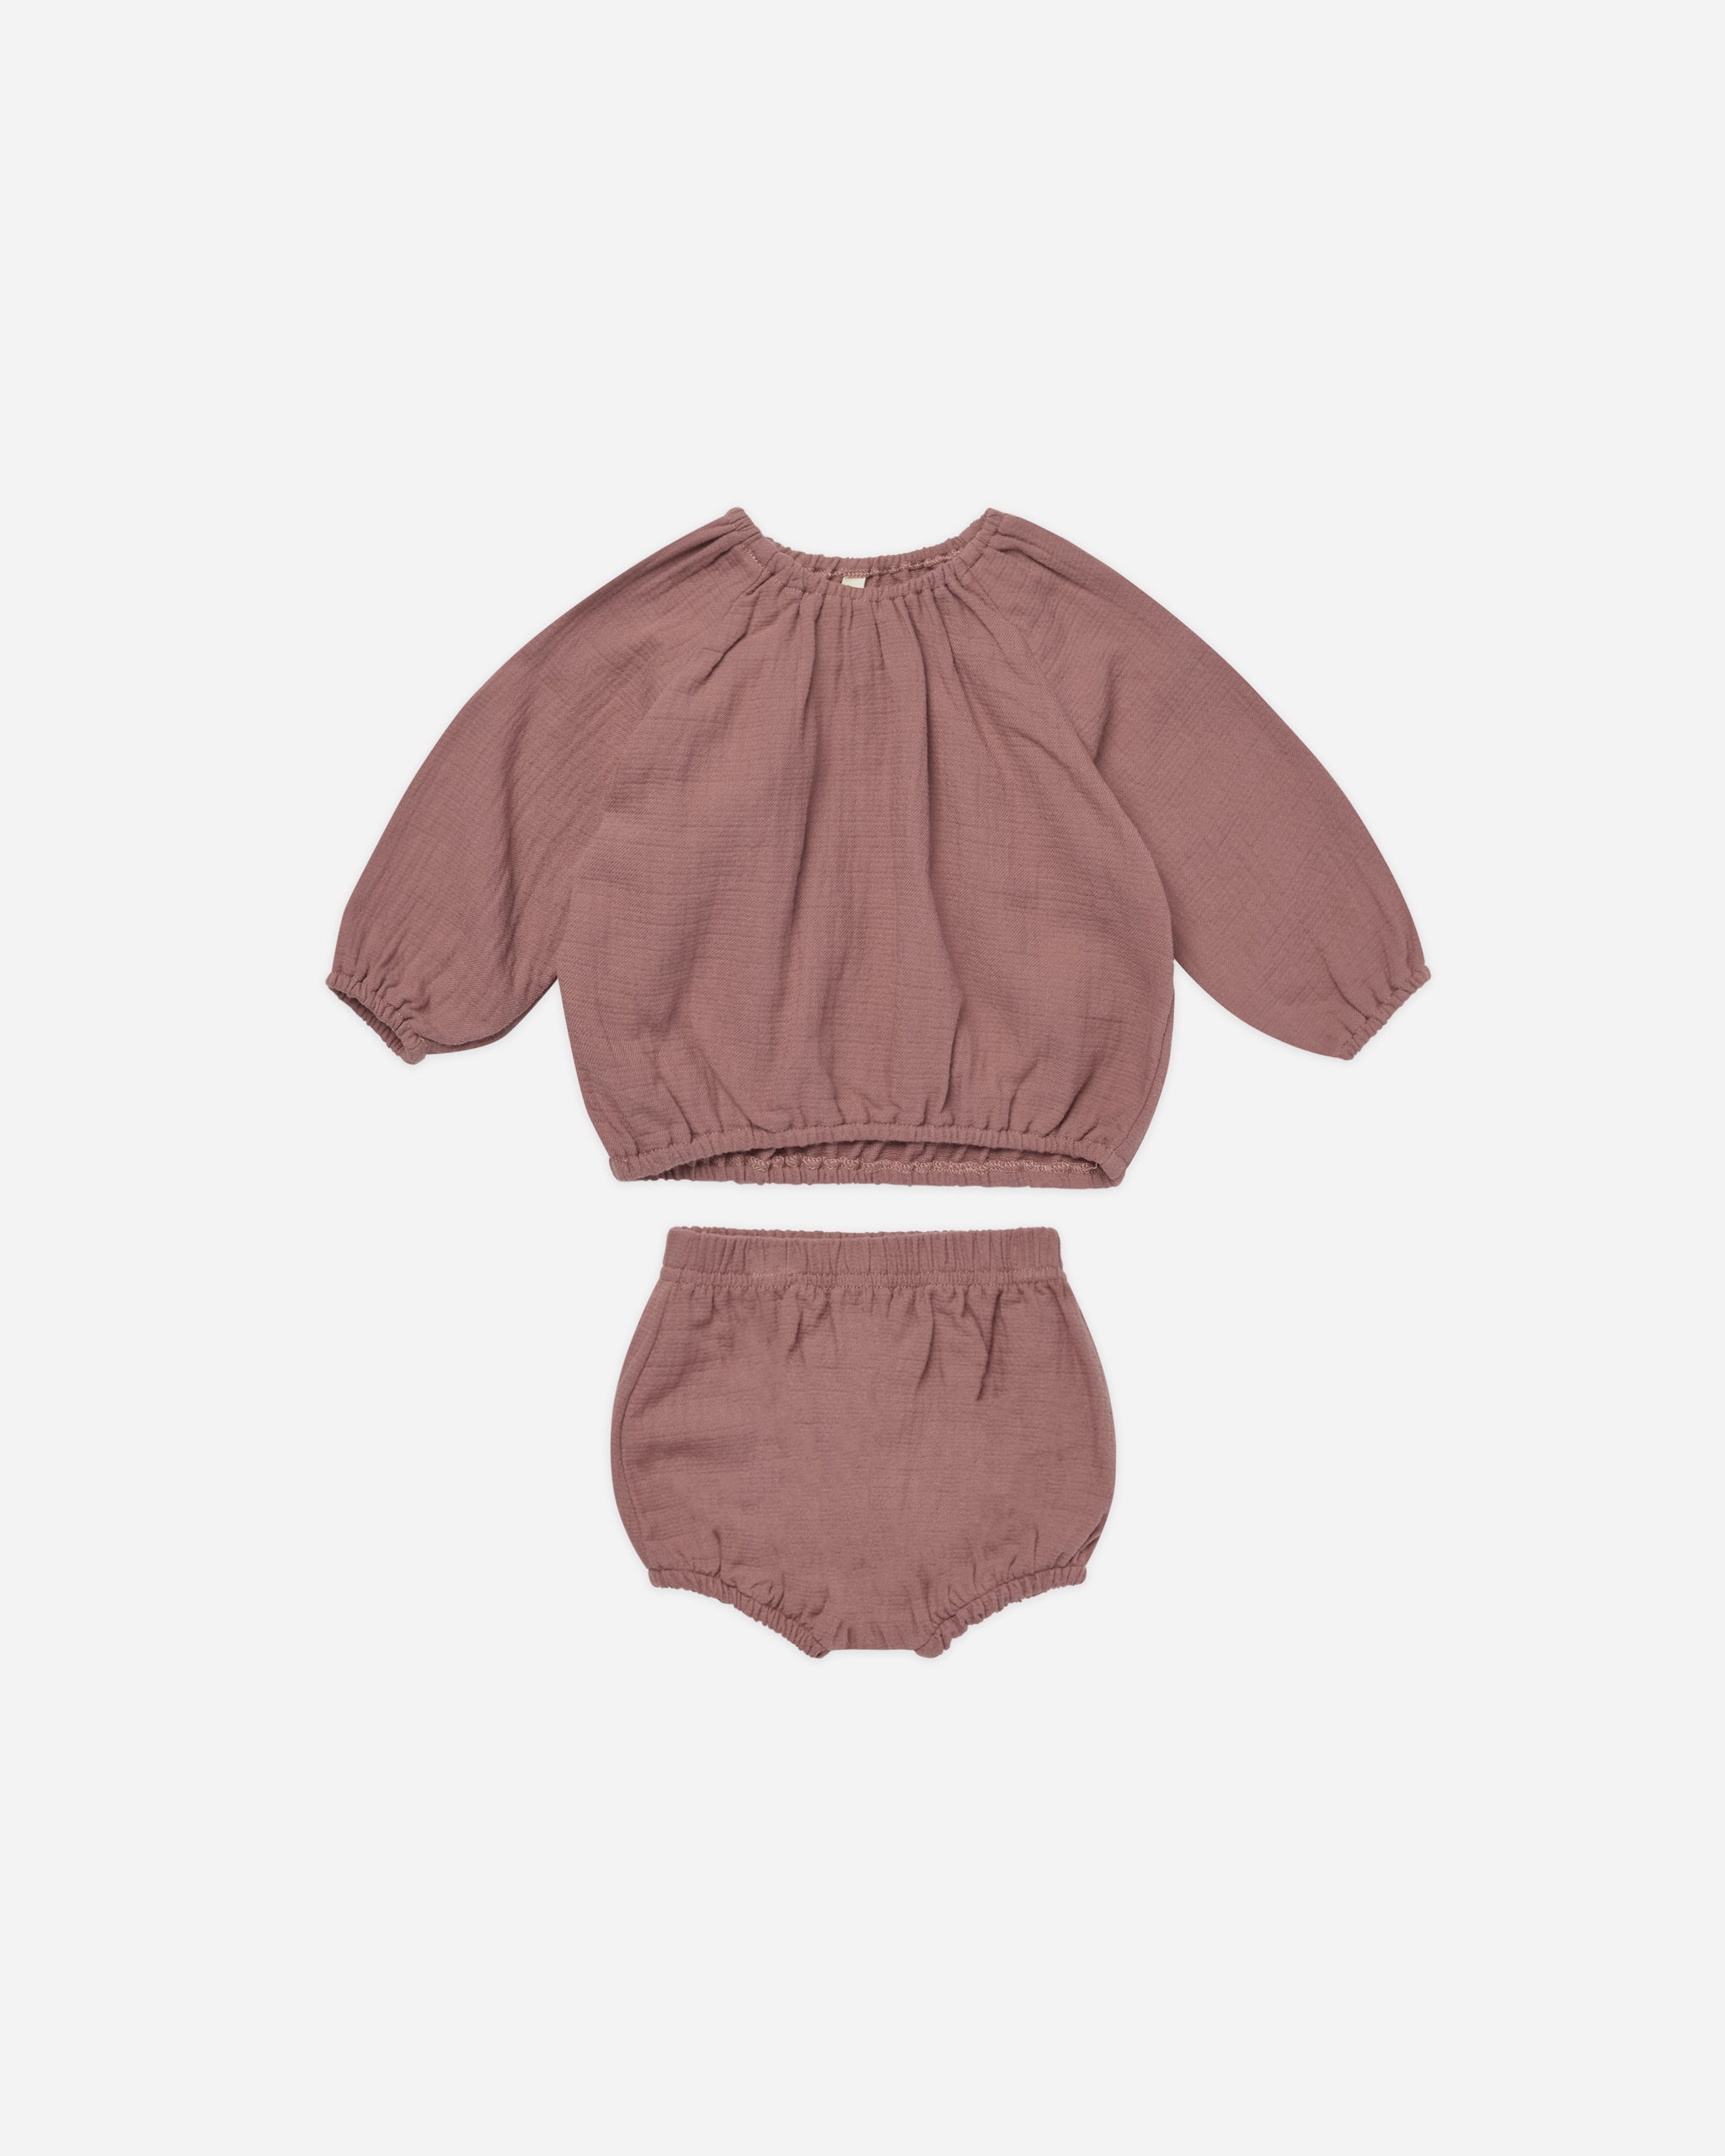 Cinch Long Sleeve Tee + Bloomer || Fig - Rylee + Cru | Kids Clothes | Trendy Baby Clothes | Modern Infant Outfits |